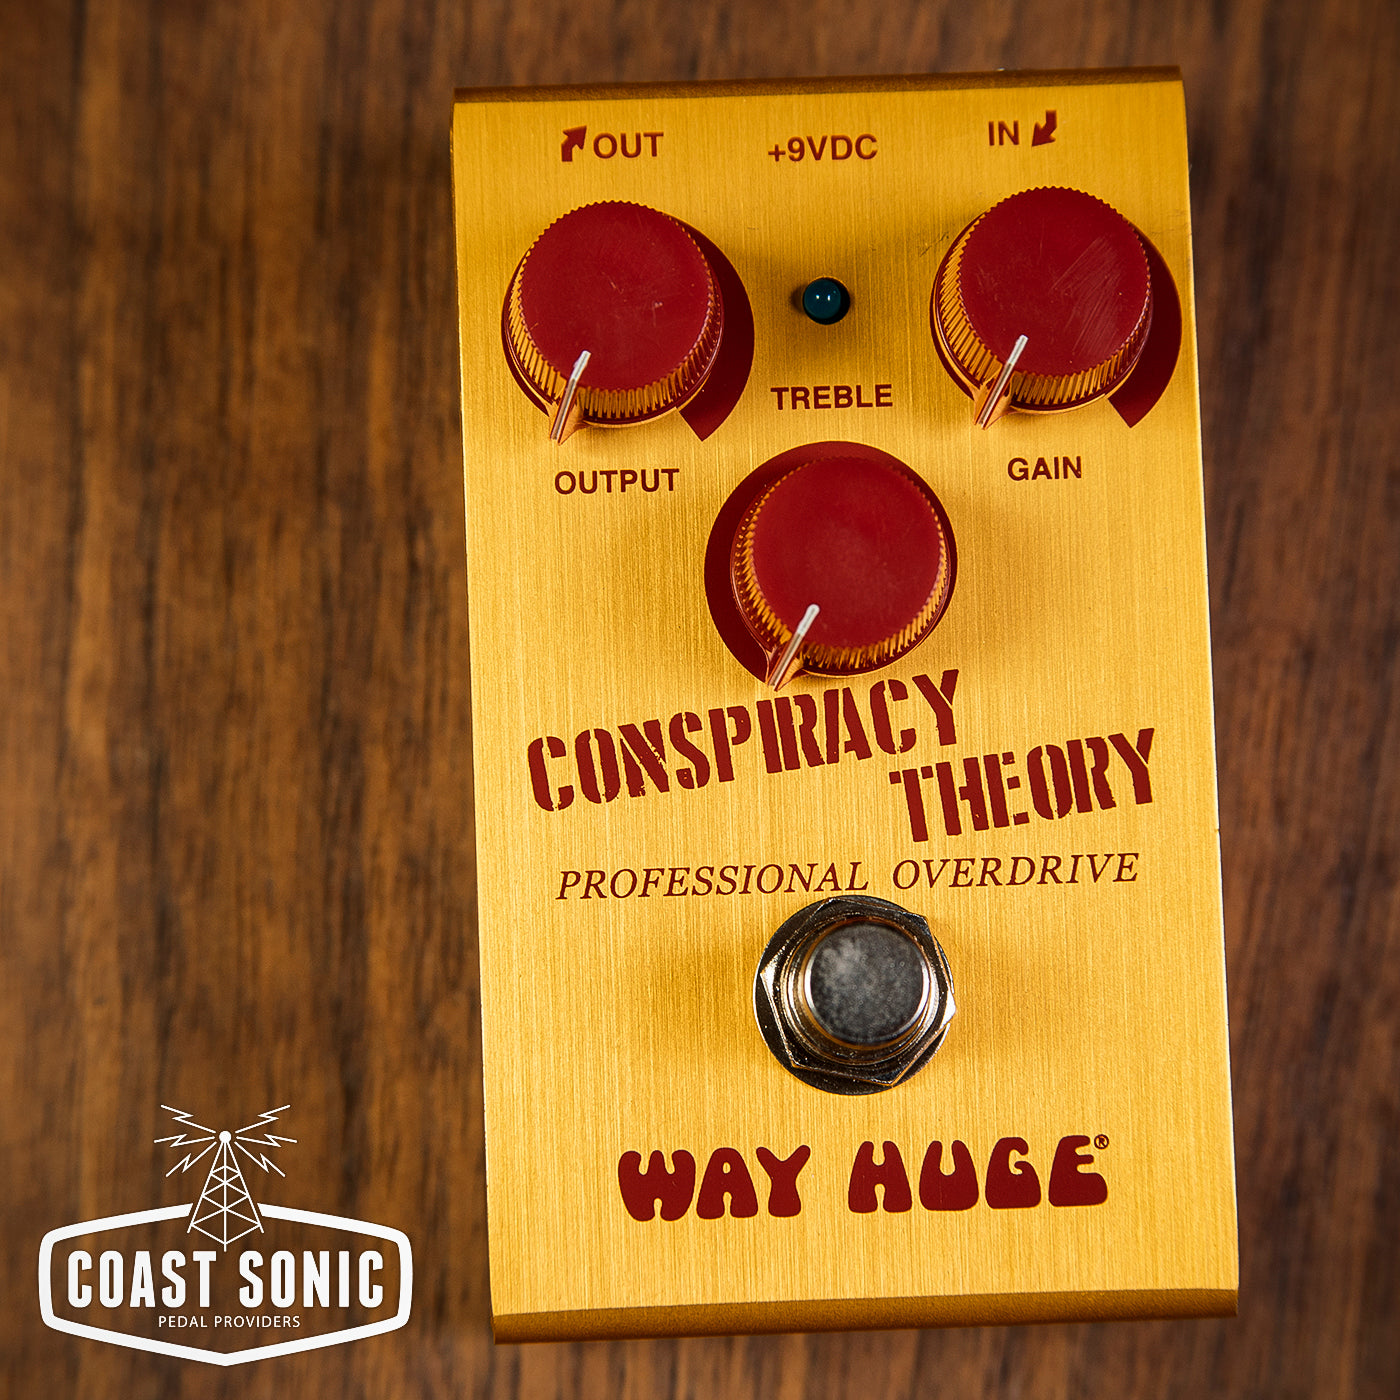 Way Huge Smalls Conspiracy Theory Professional Overdrive